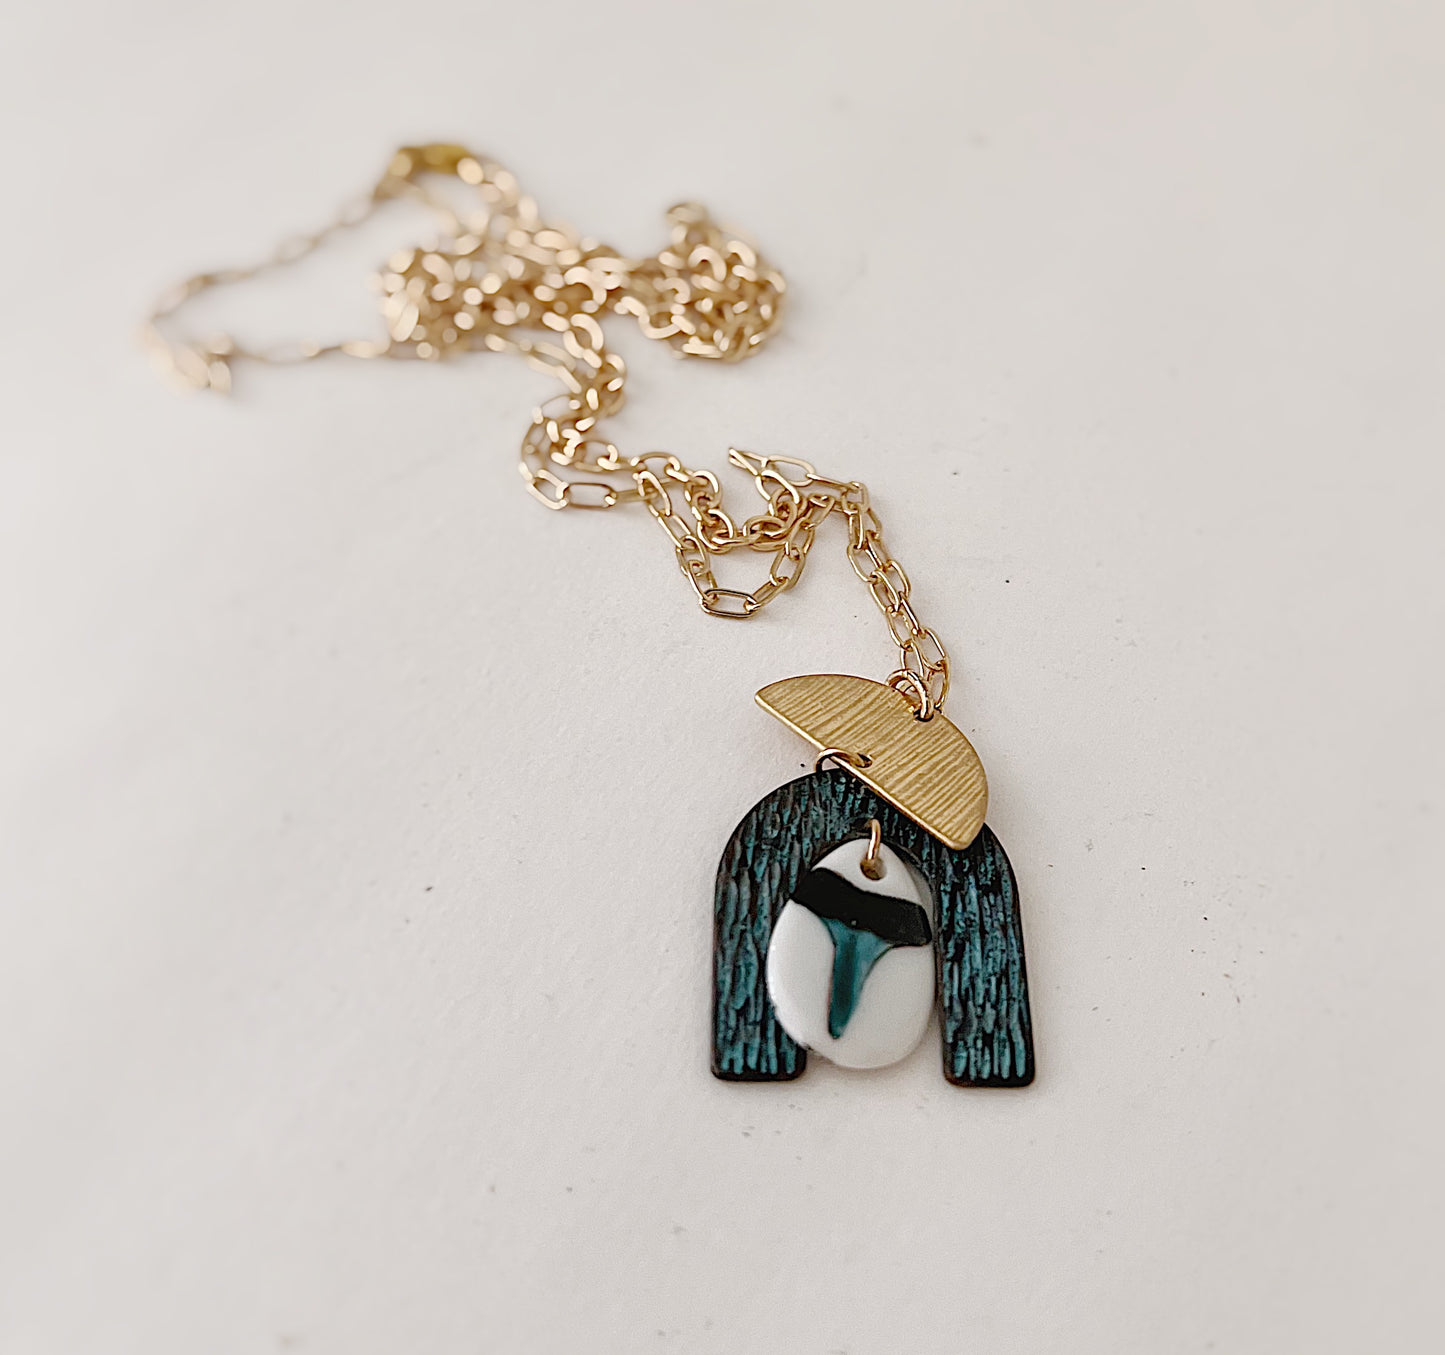 Shark tooth necklace porcelain pendant gold chain